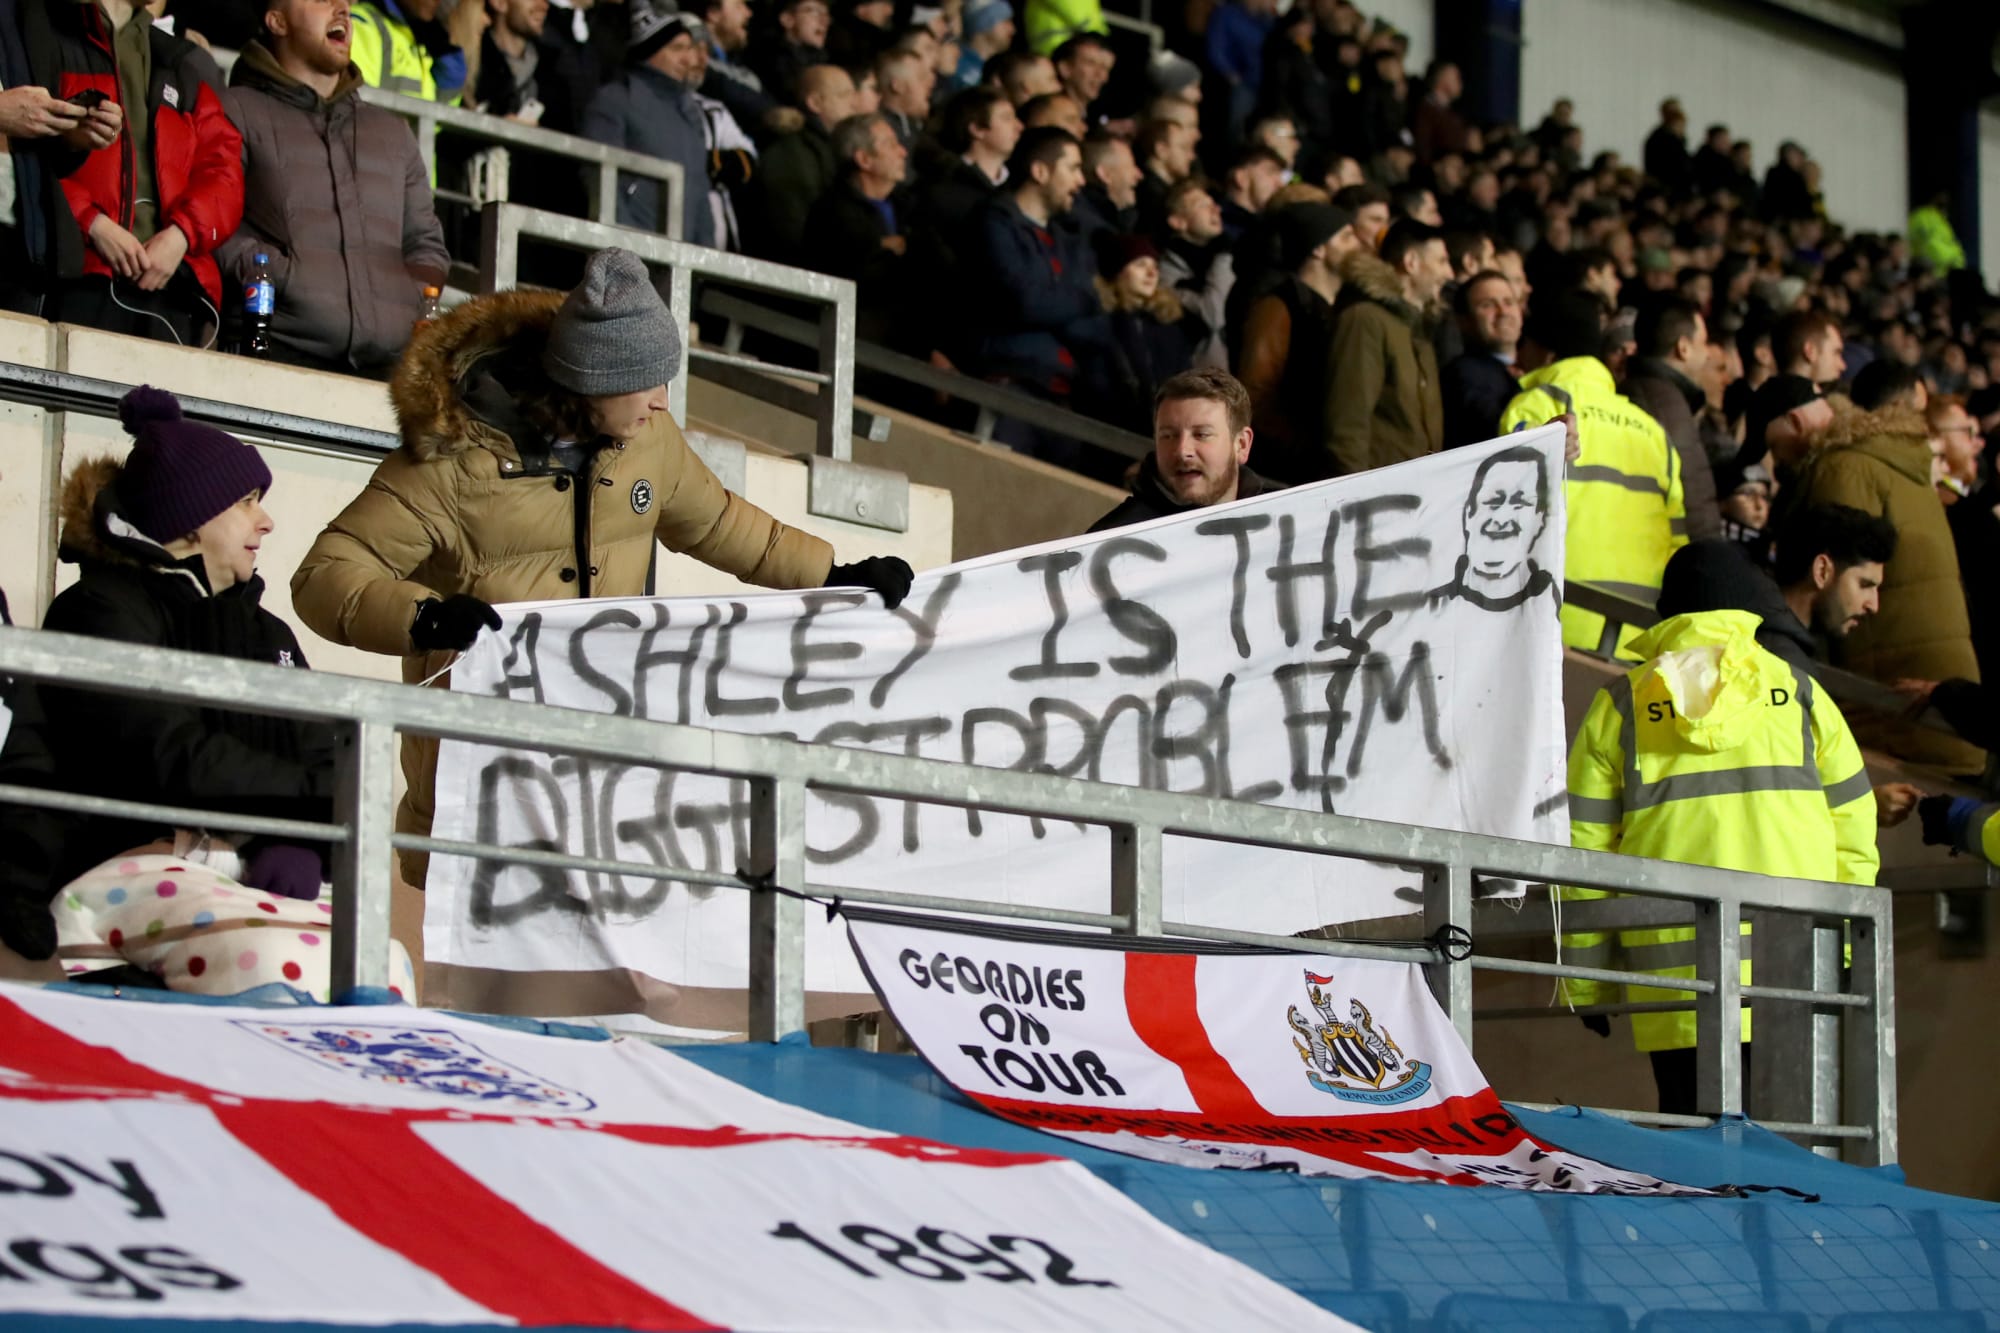 Newcastle takeover update - One step forward and two steps back